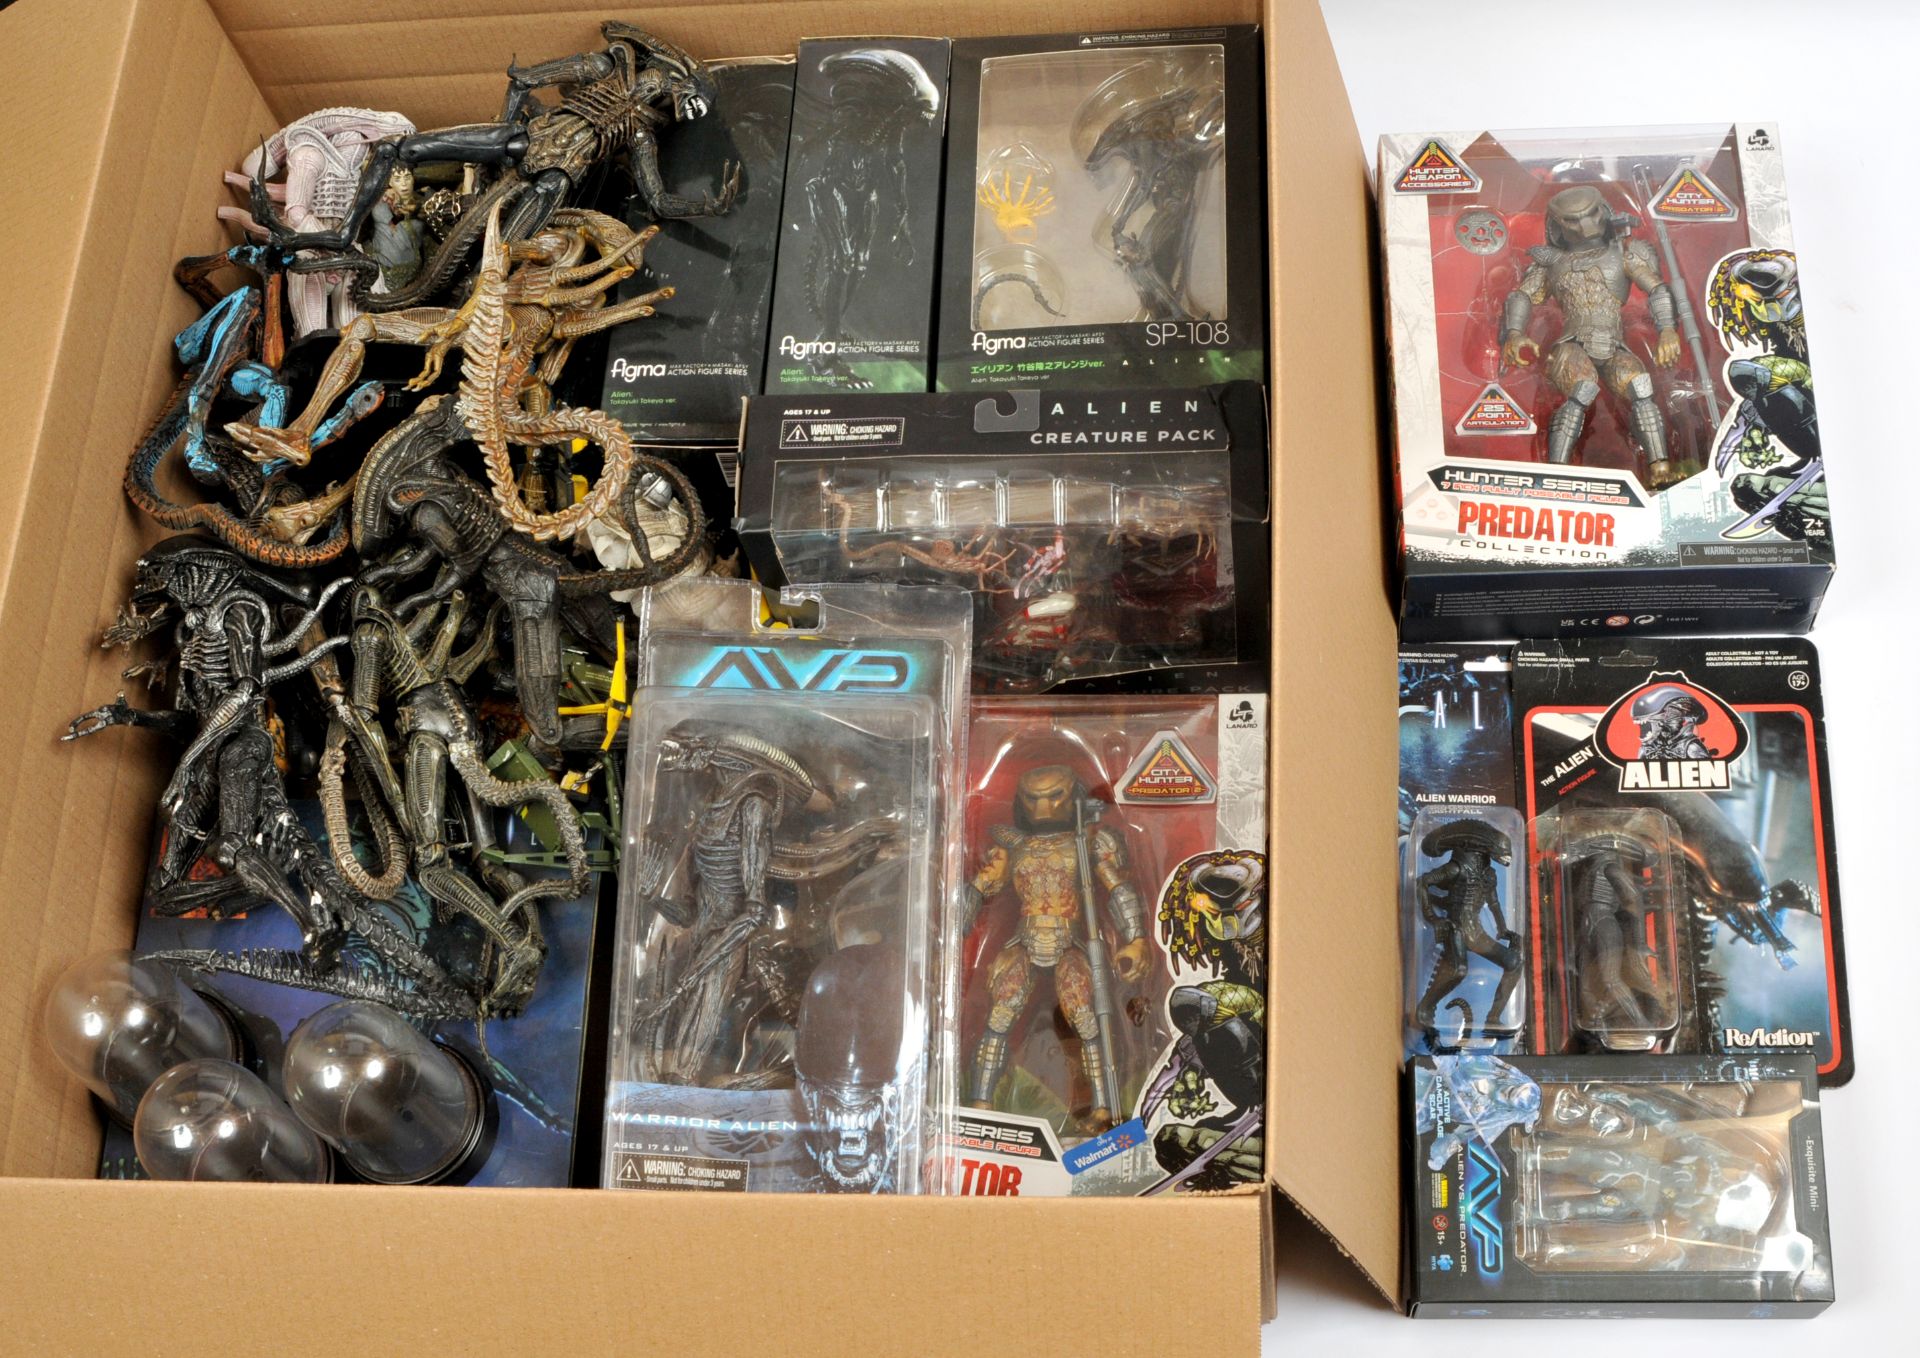 Aliens and Predator collection of action figures